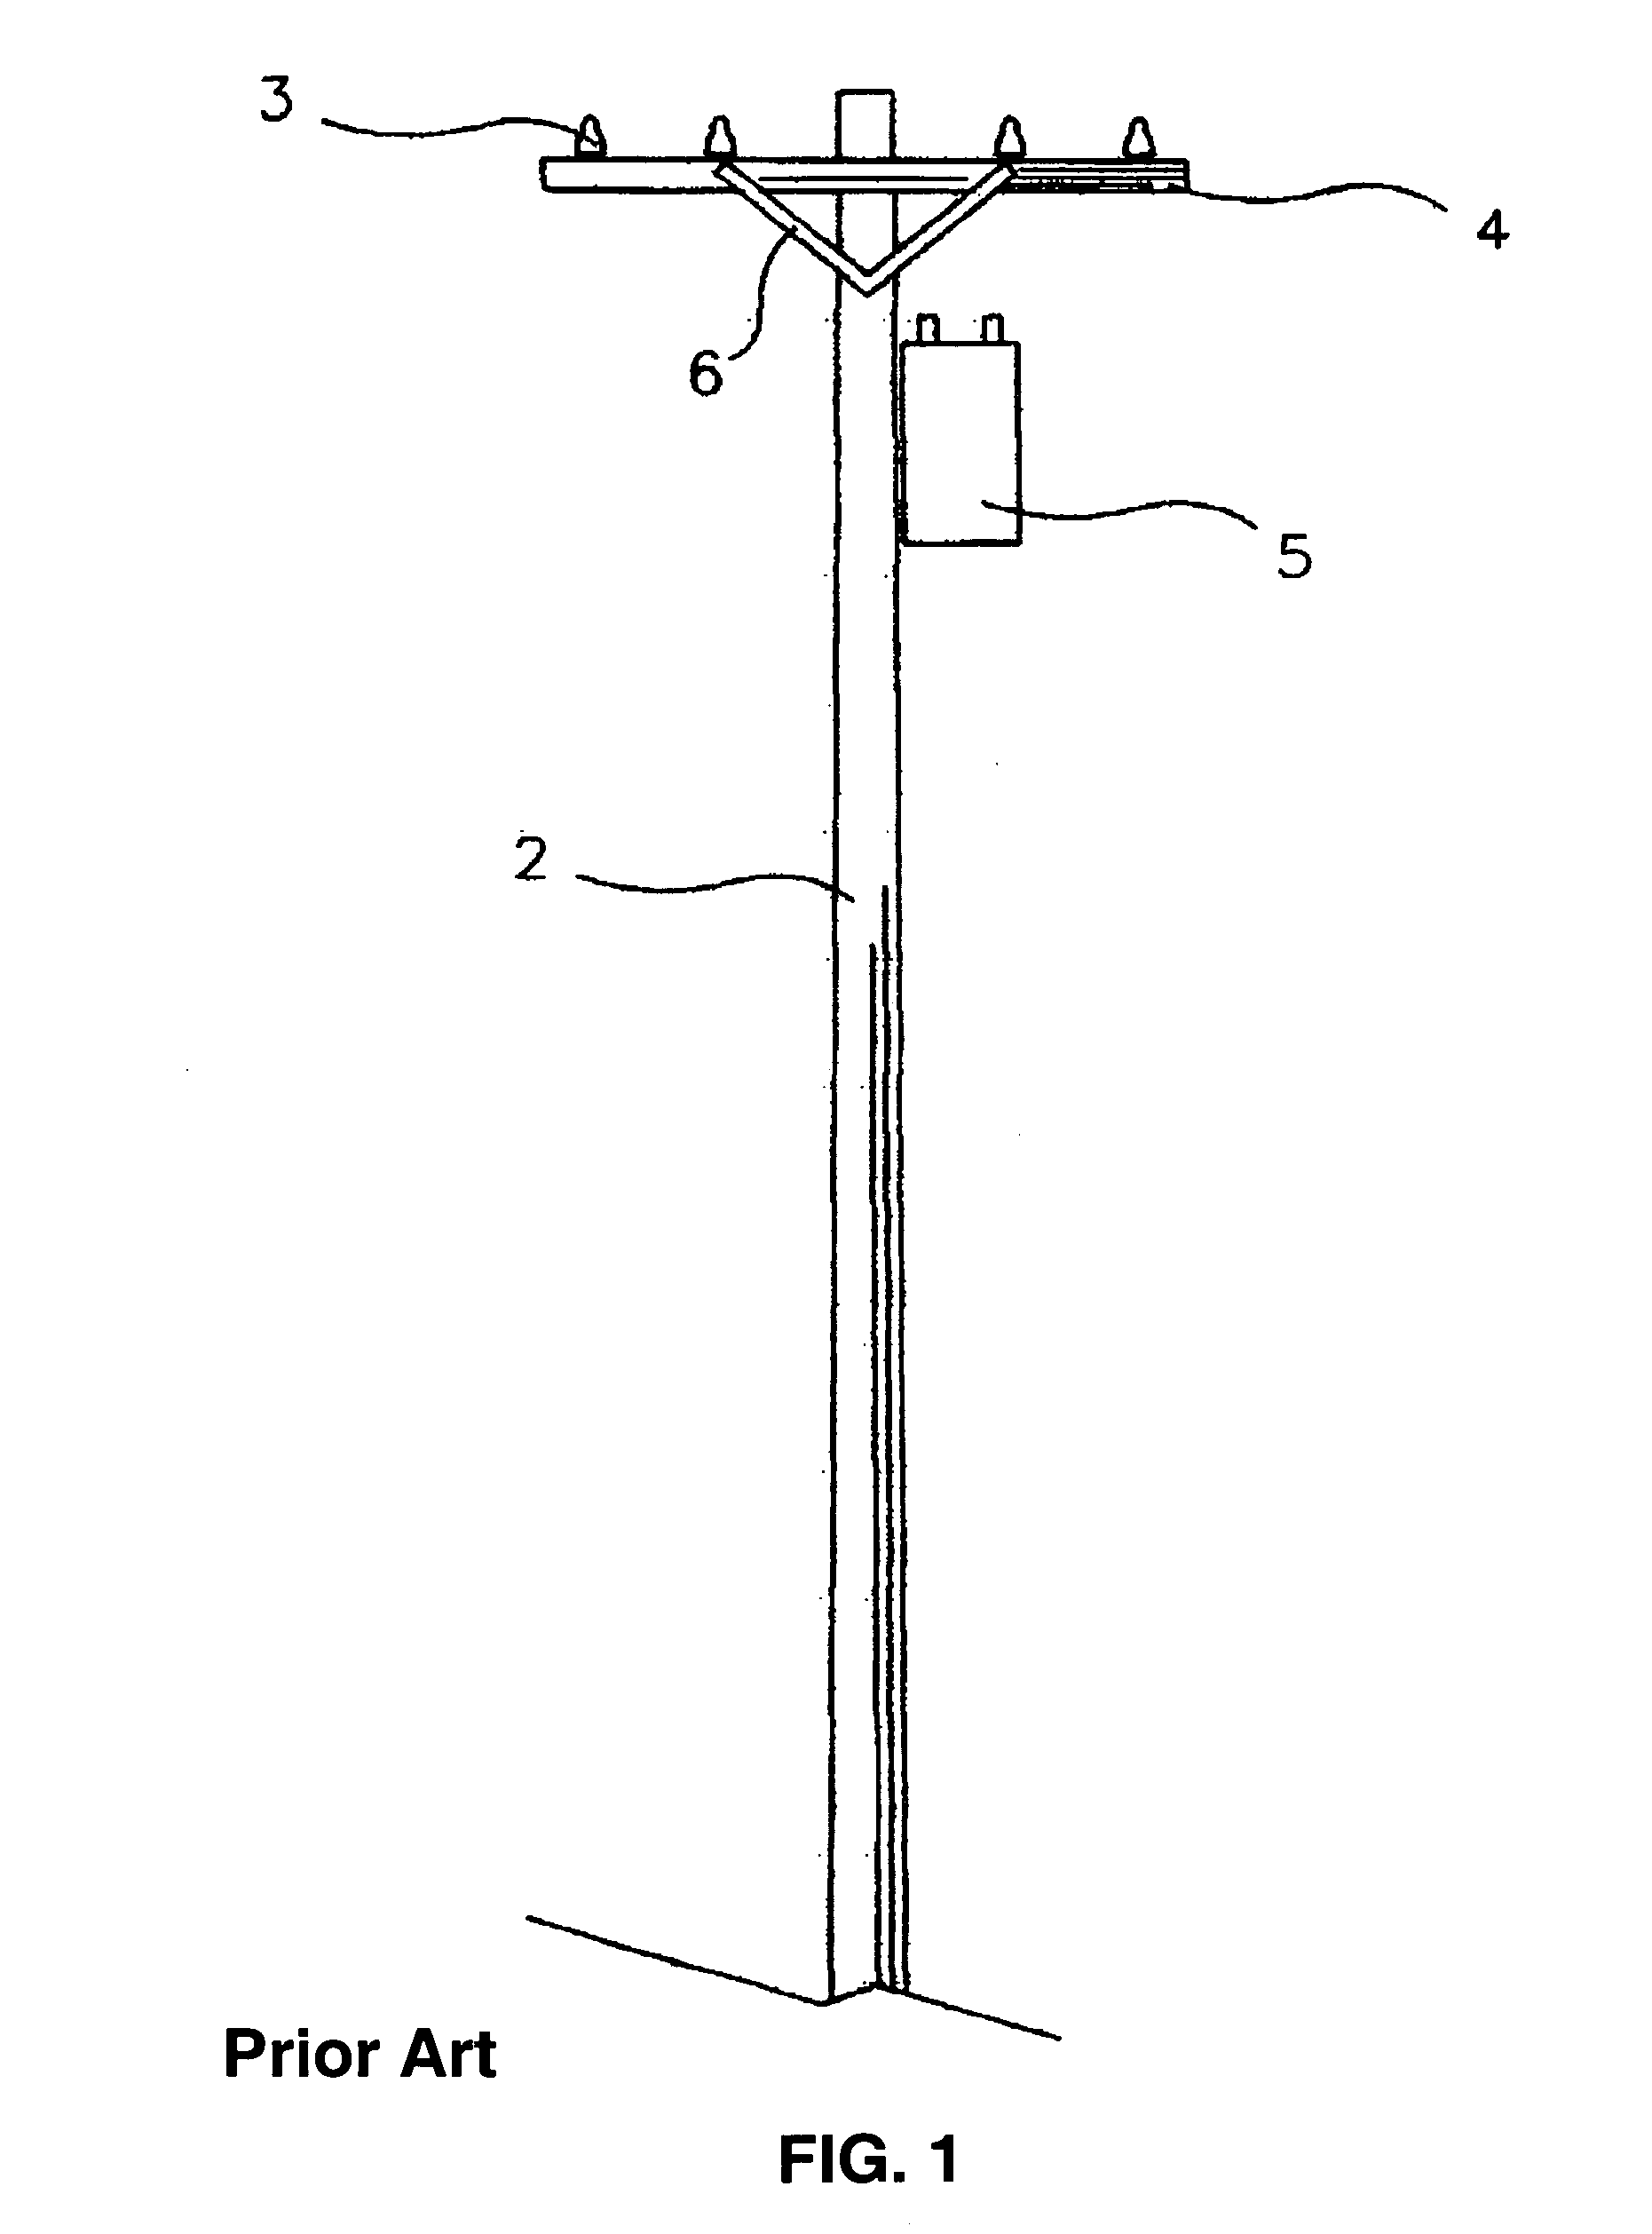 Utility pole and tower safety and protection device